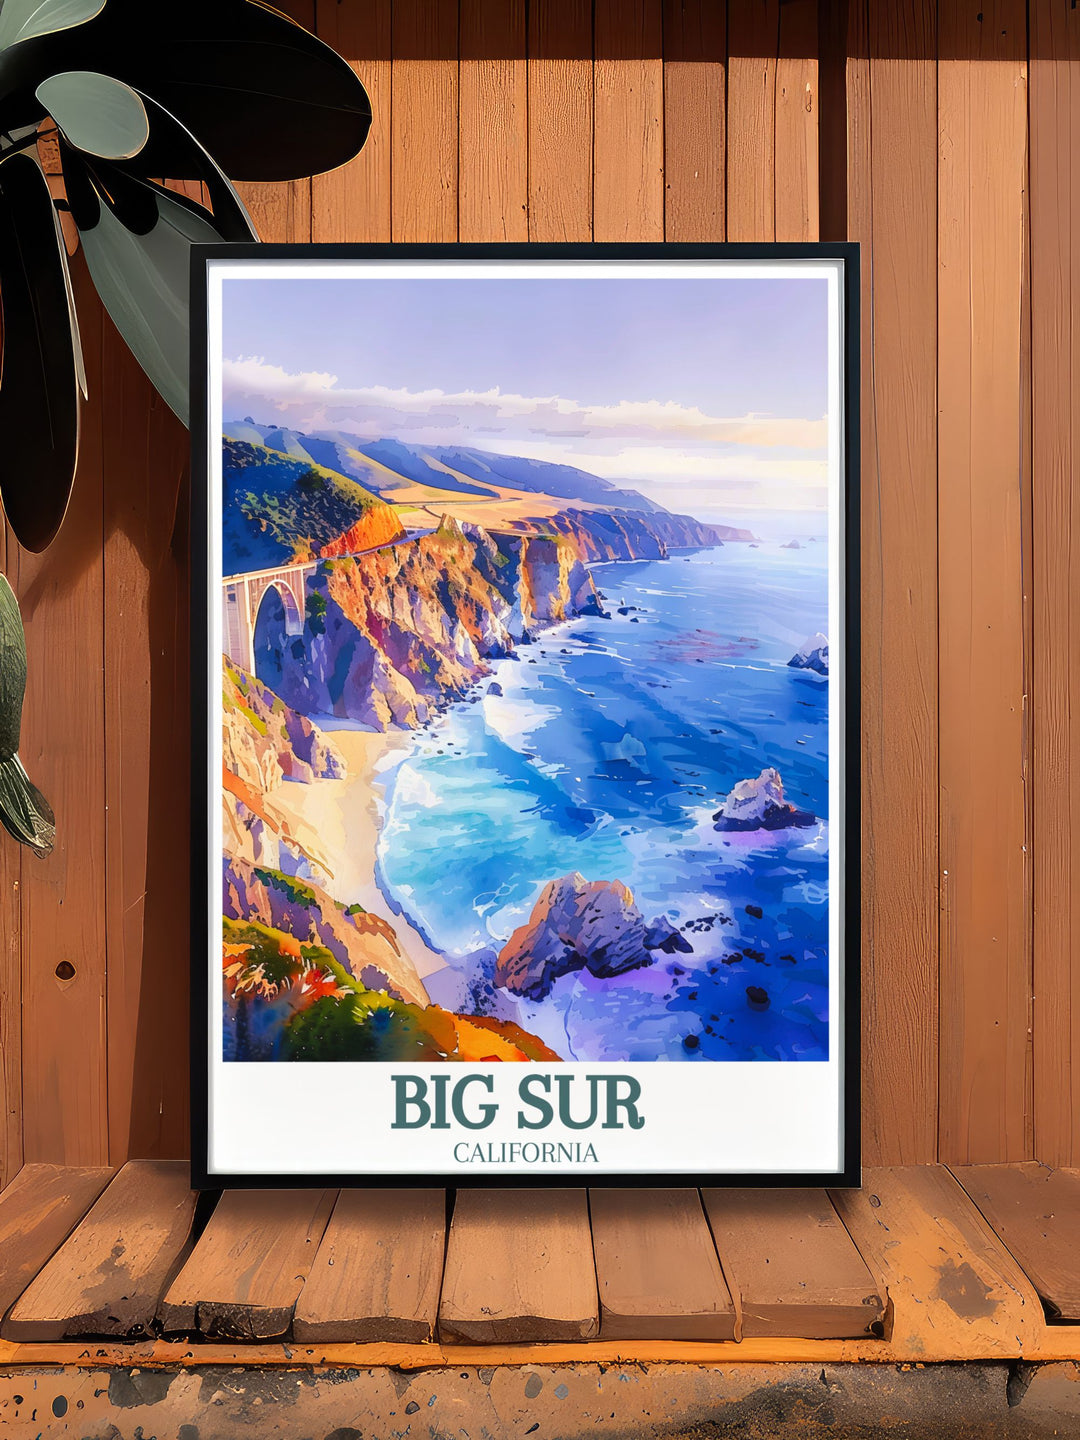 The architectural beauty of Bixby Creek Bridge and the natural splendor of Big Sur are captured in this travel poster, making it an excellent addition to any nature or architecture lovers collection.